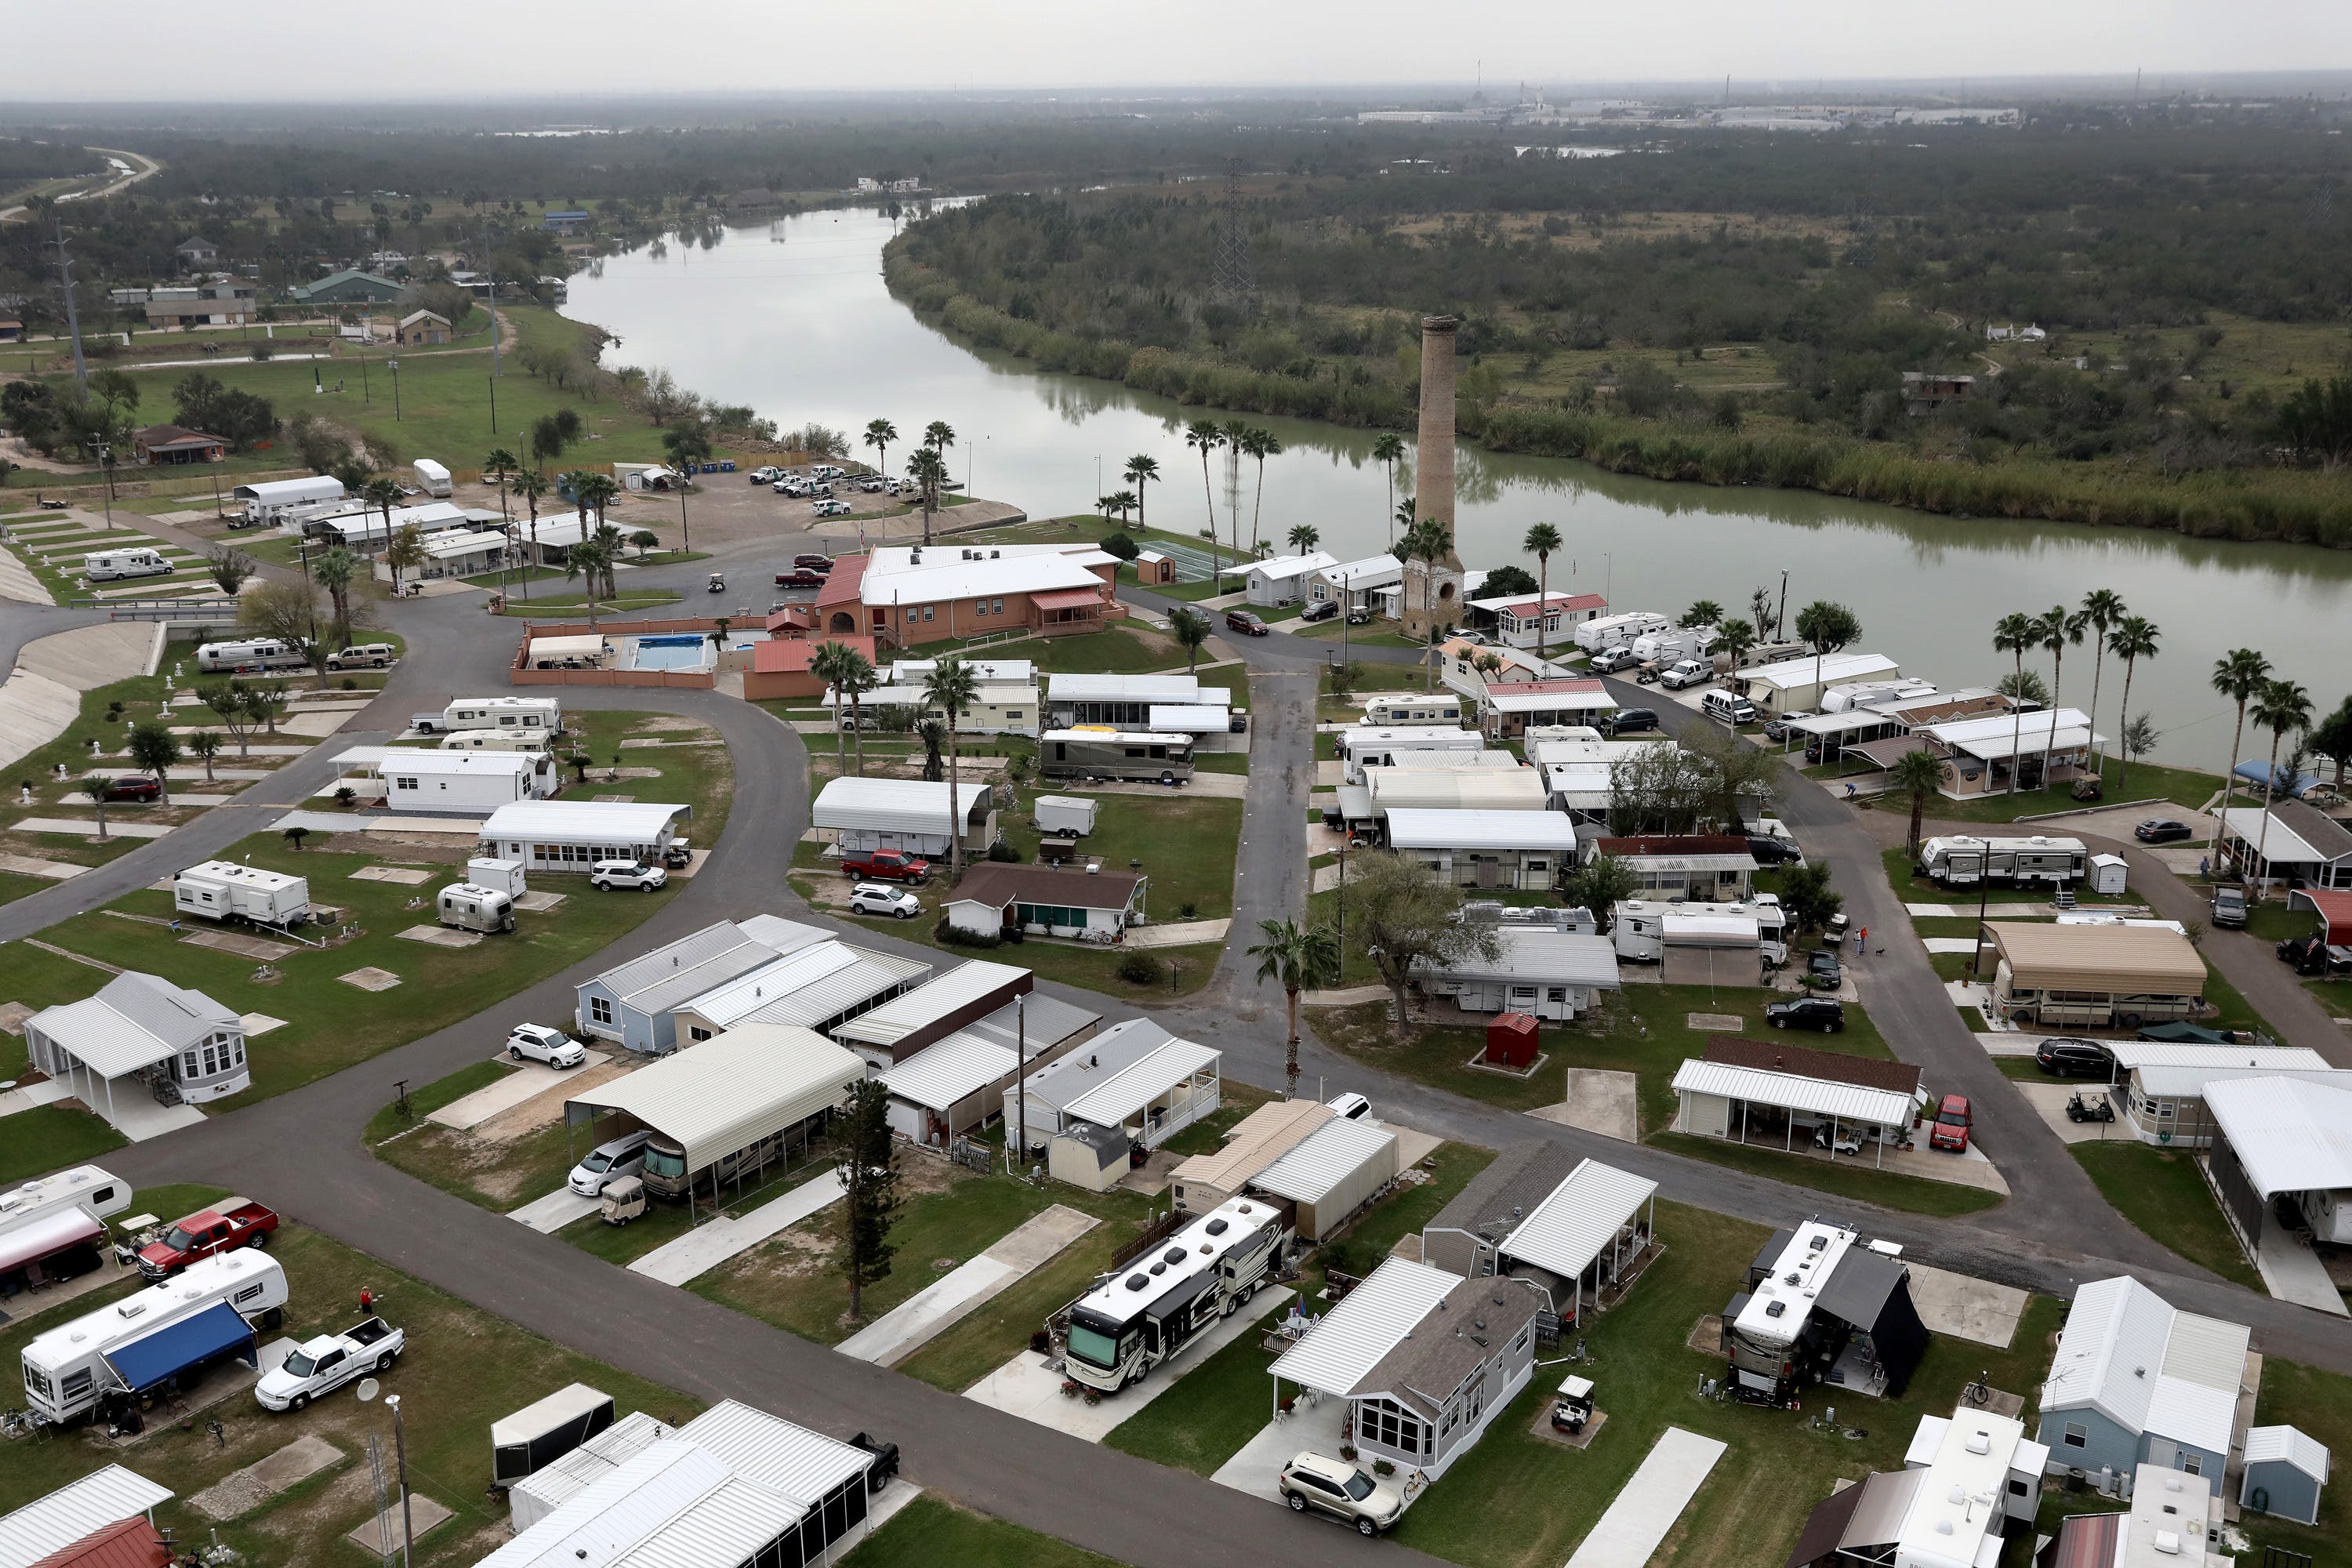 LOS EBANOS, TX - JANUARY 05:  An RV community sits on the bank of the Rio Grande at the U.S.-Mexico border on January 5, 2017 near Los Ebanos, Texas. The number of illegal immigrants passing through such areas has surged ahead of the upcoming Presidential inauguration of Donald Trump, who has pledged to build a wall along the U.S.-Mexico border.  (Photo by John Moore/Getty Images)